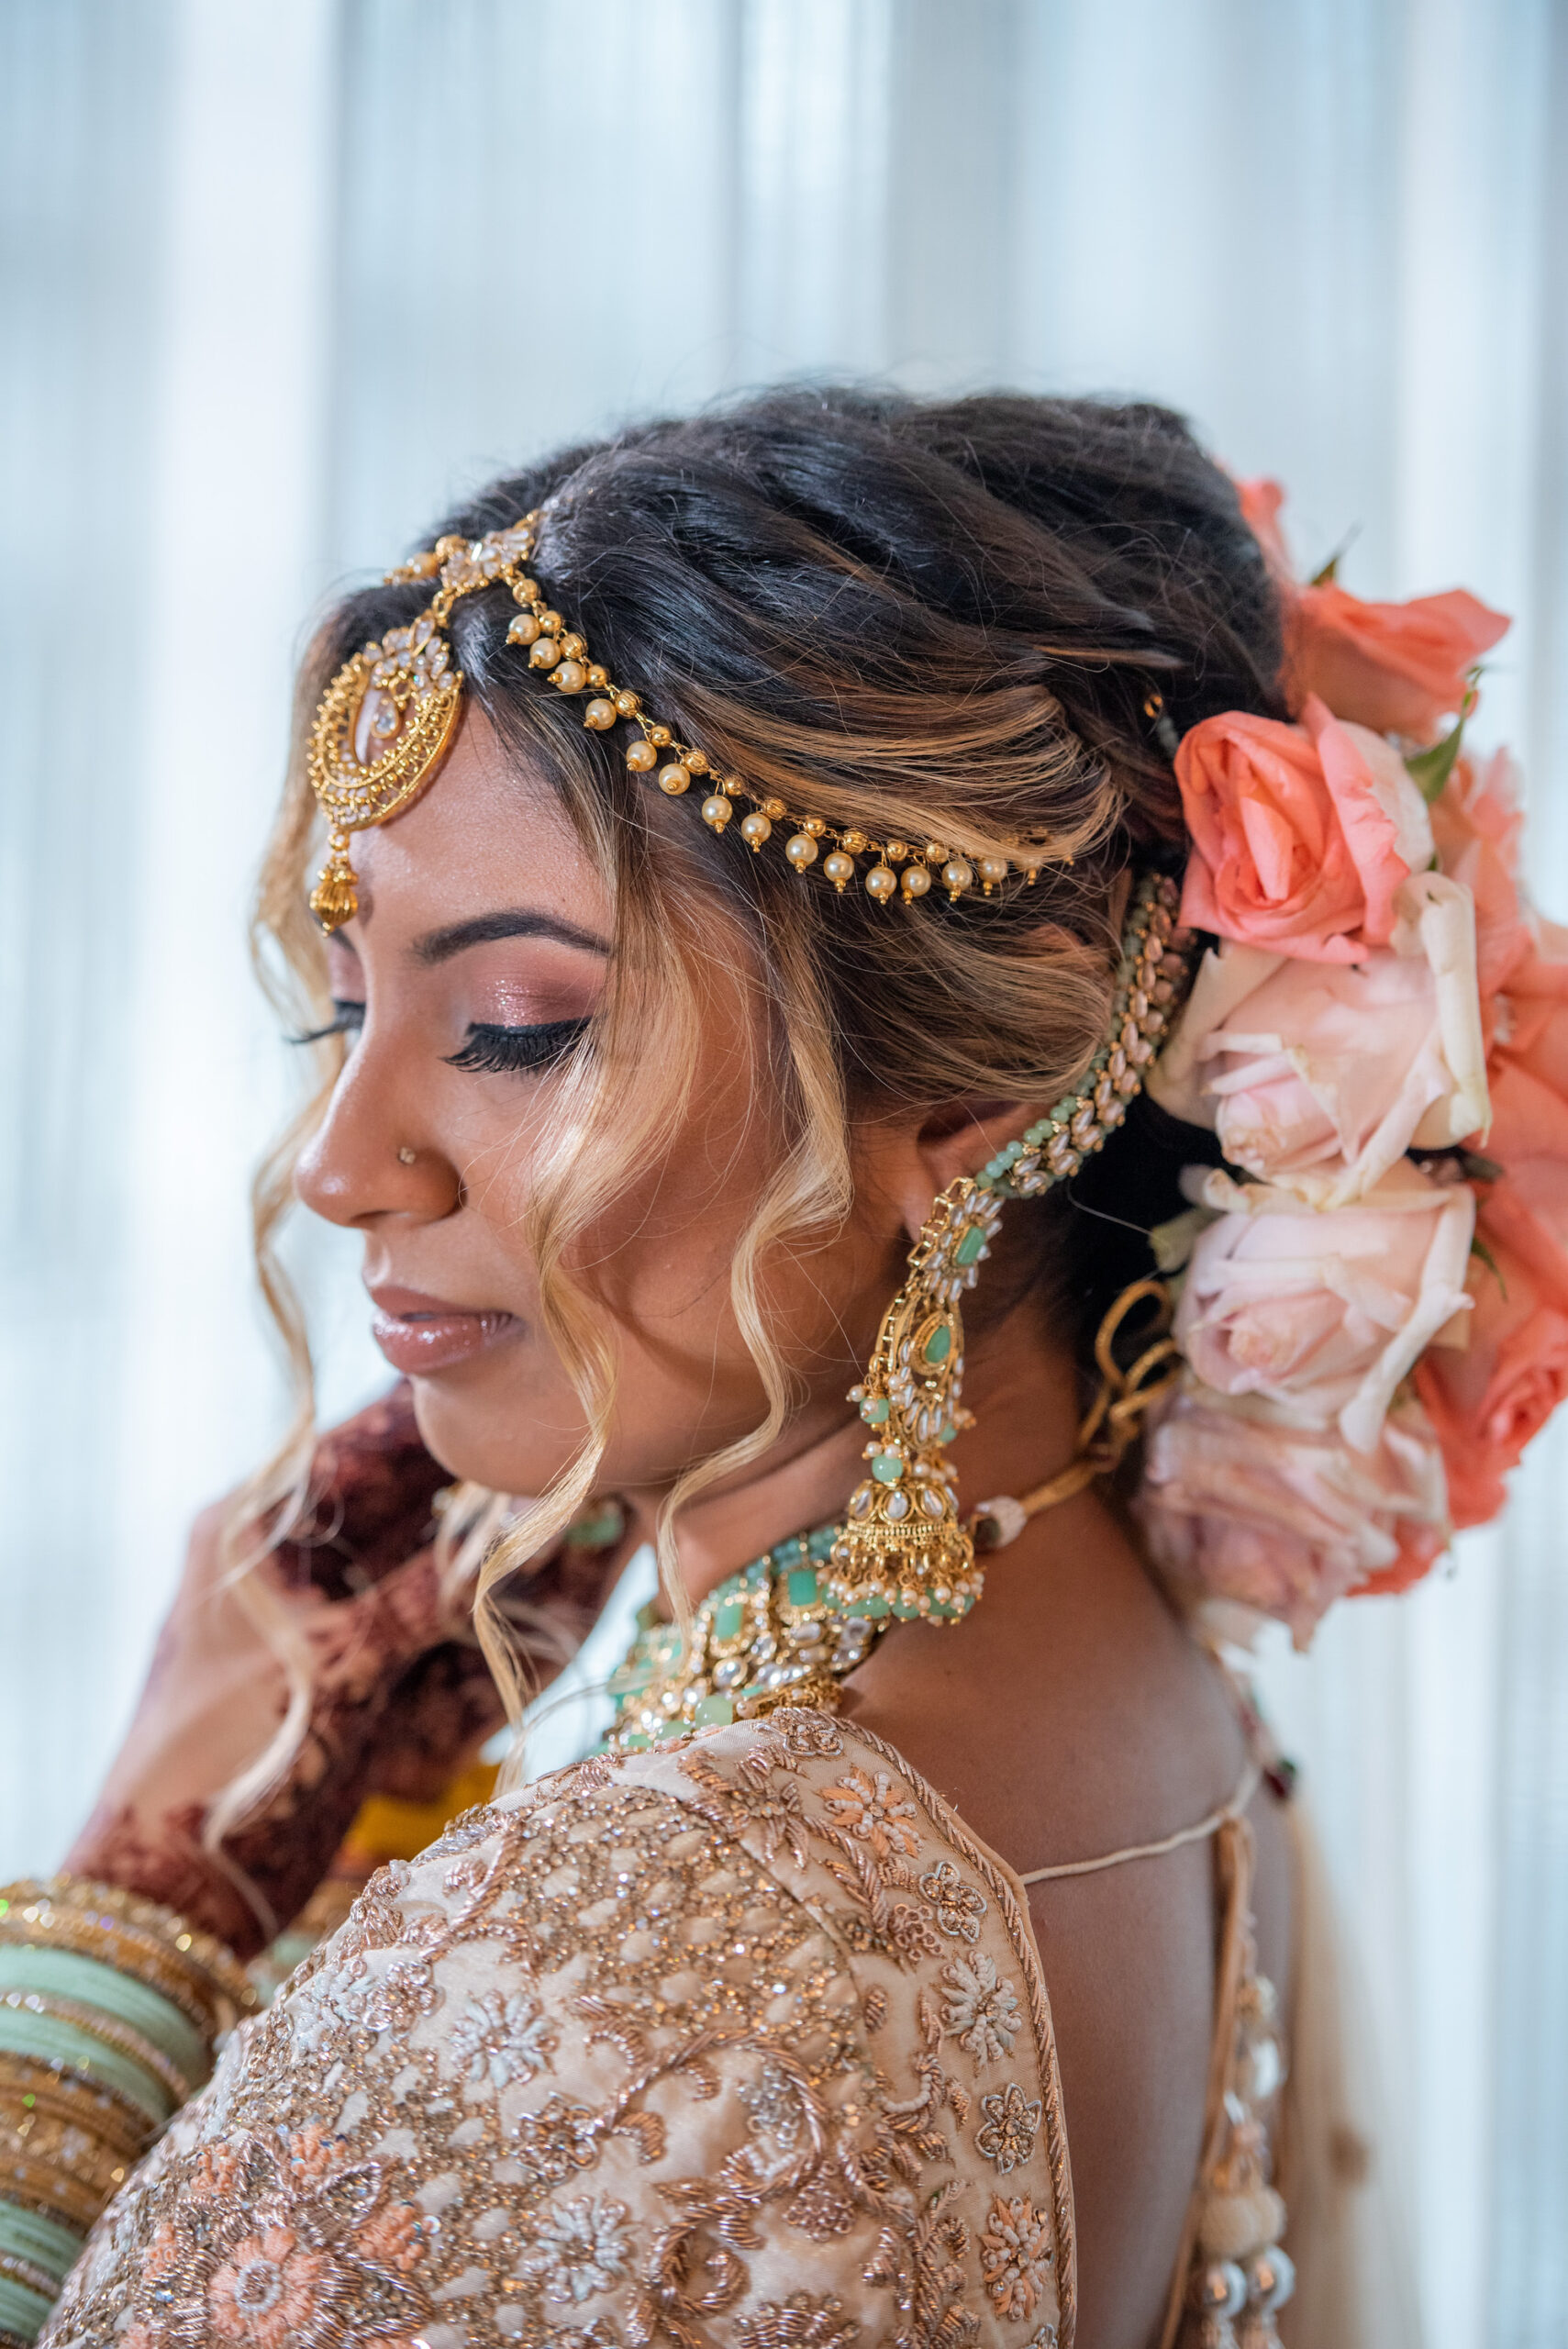 Florida Bride Getting Ready for Indian Wedding, Wearing Head Jewelry Chain, Gold Headpiece with Pink and Coral Rose Flowers in Hair | Tampa Bay Hair and Makeup Artist Michele Renee the Studio